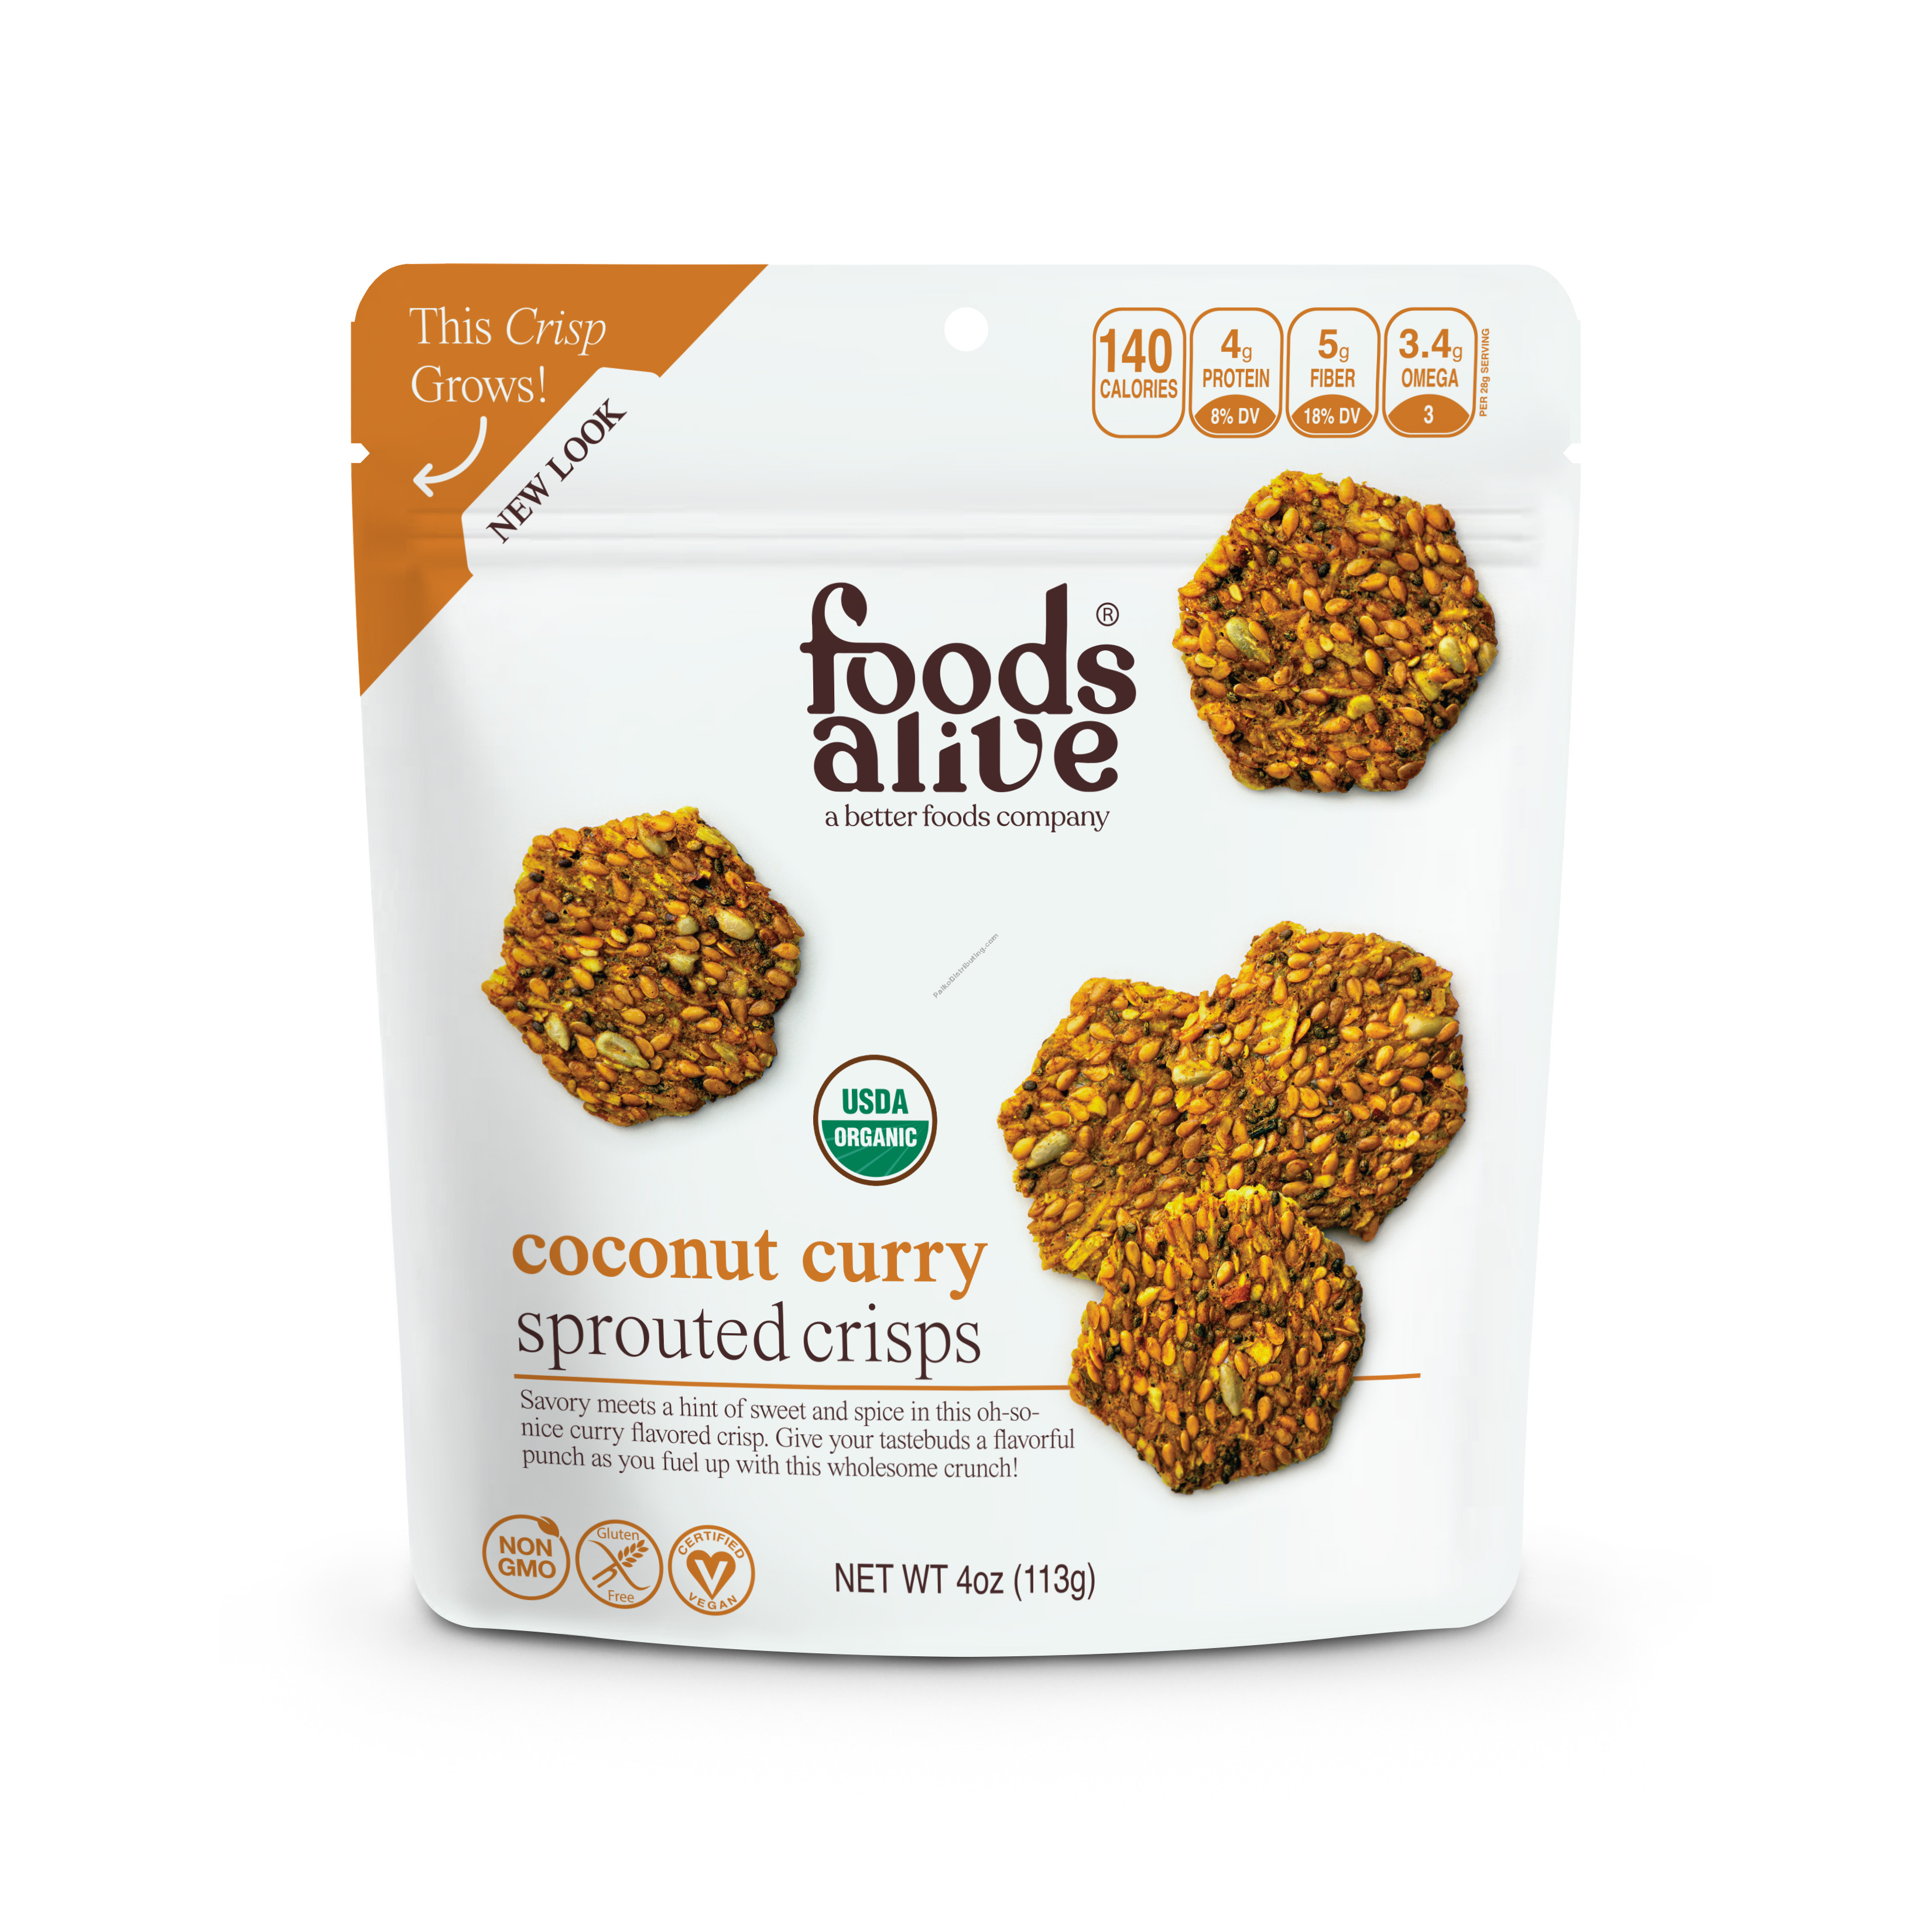 Product Image: Organic Coconut Curry Crisps